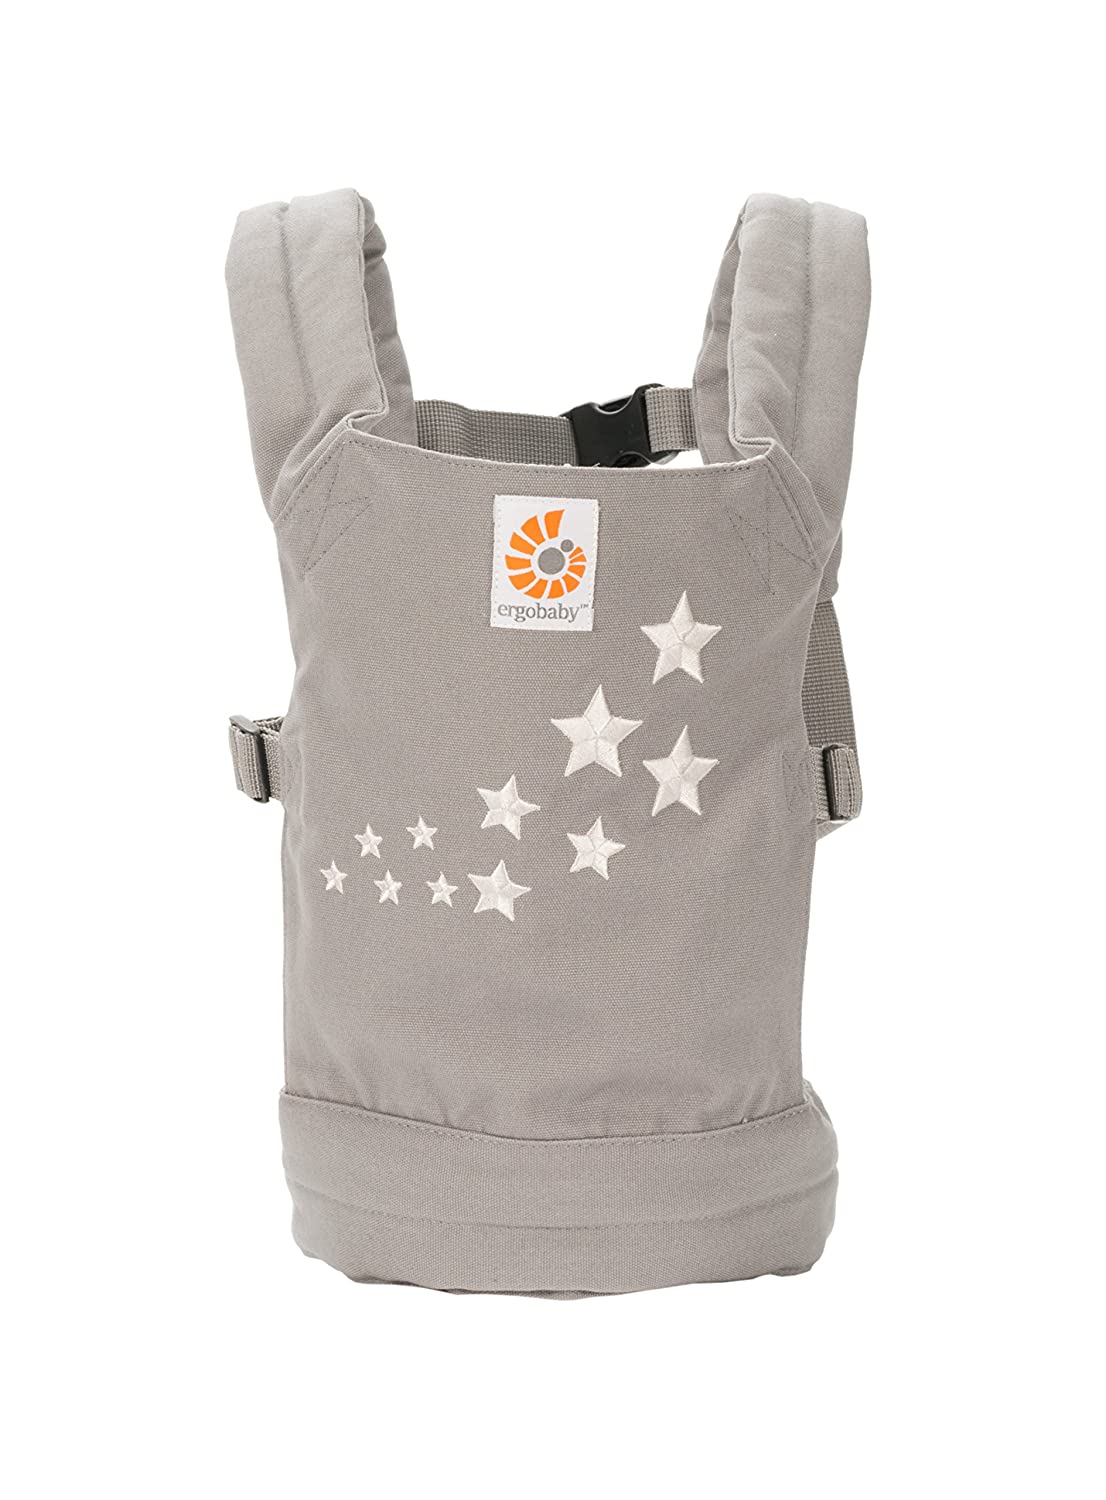 ERGObaby Doll Carrier Kids Toy, Baby Doll Toy, 100% Cotton Doll Carry Bag